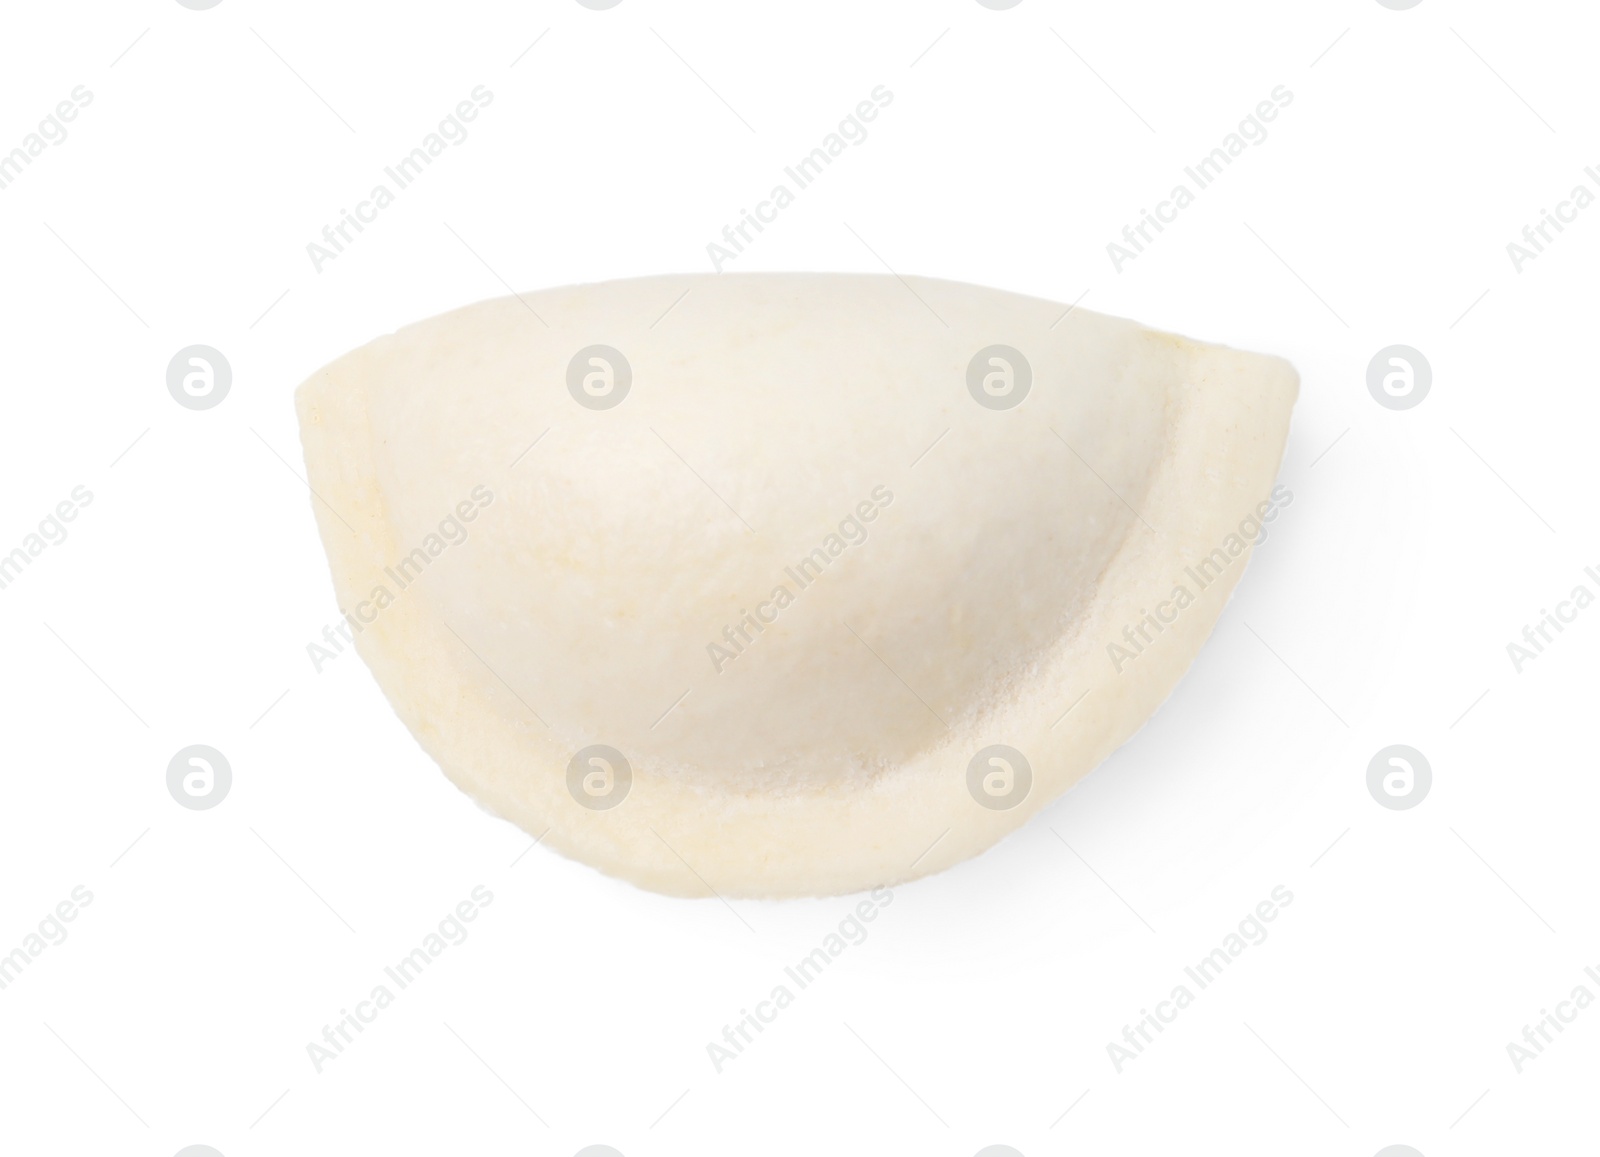 Photo of Raw dumpling (varenyk) with cottage cheese isolated on white, top view